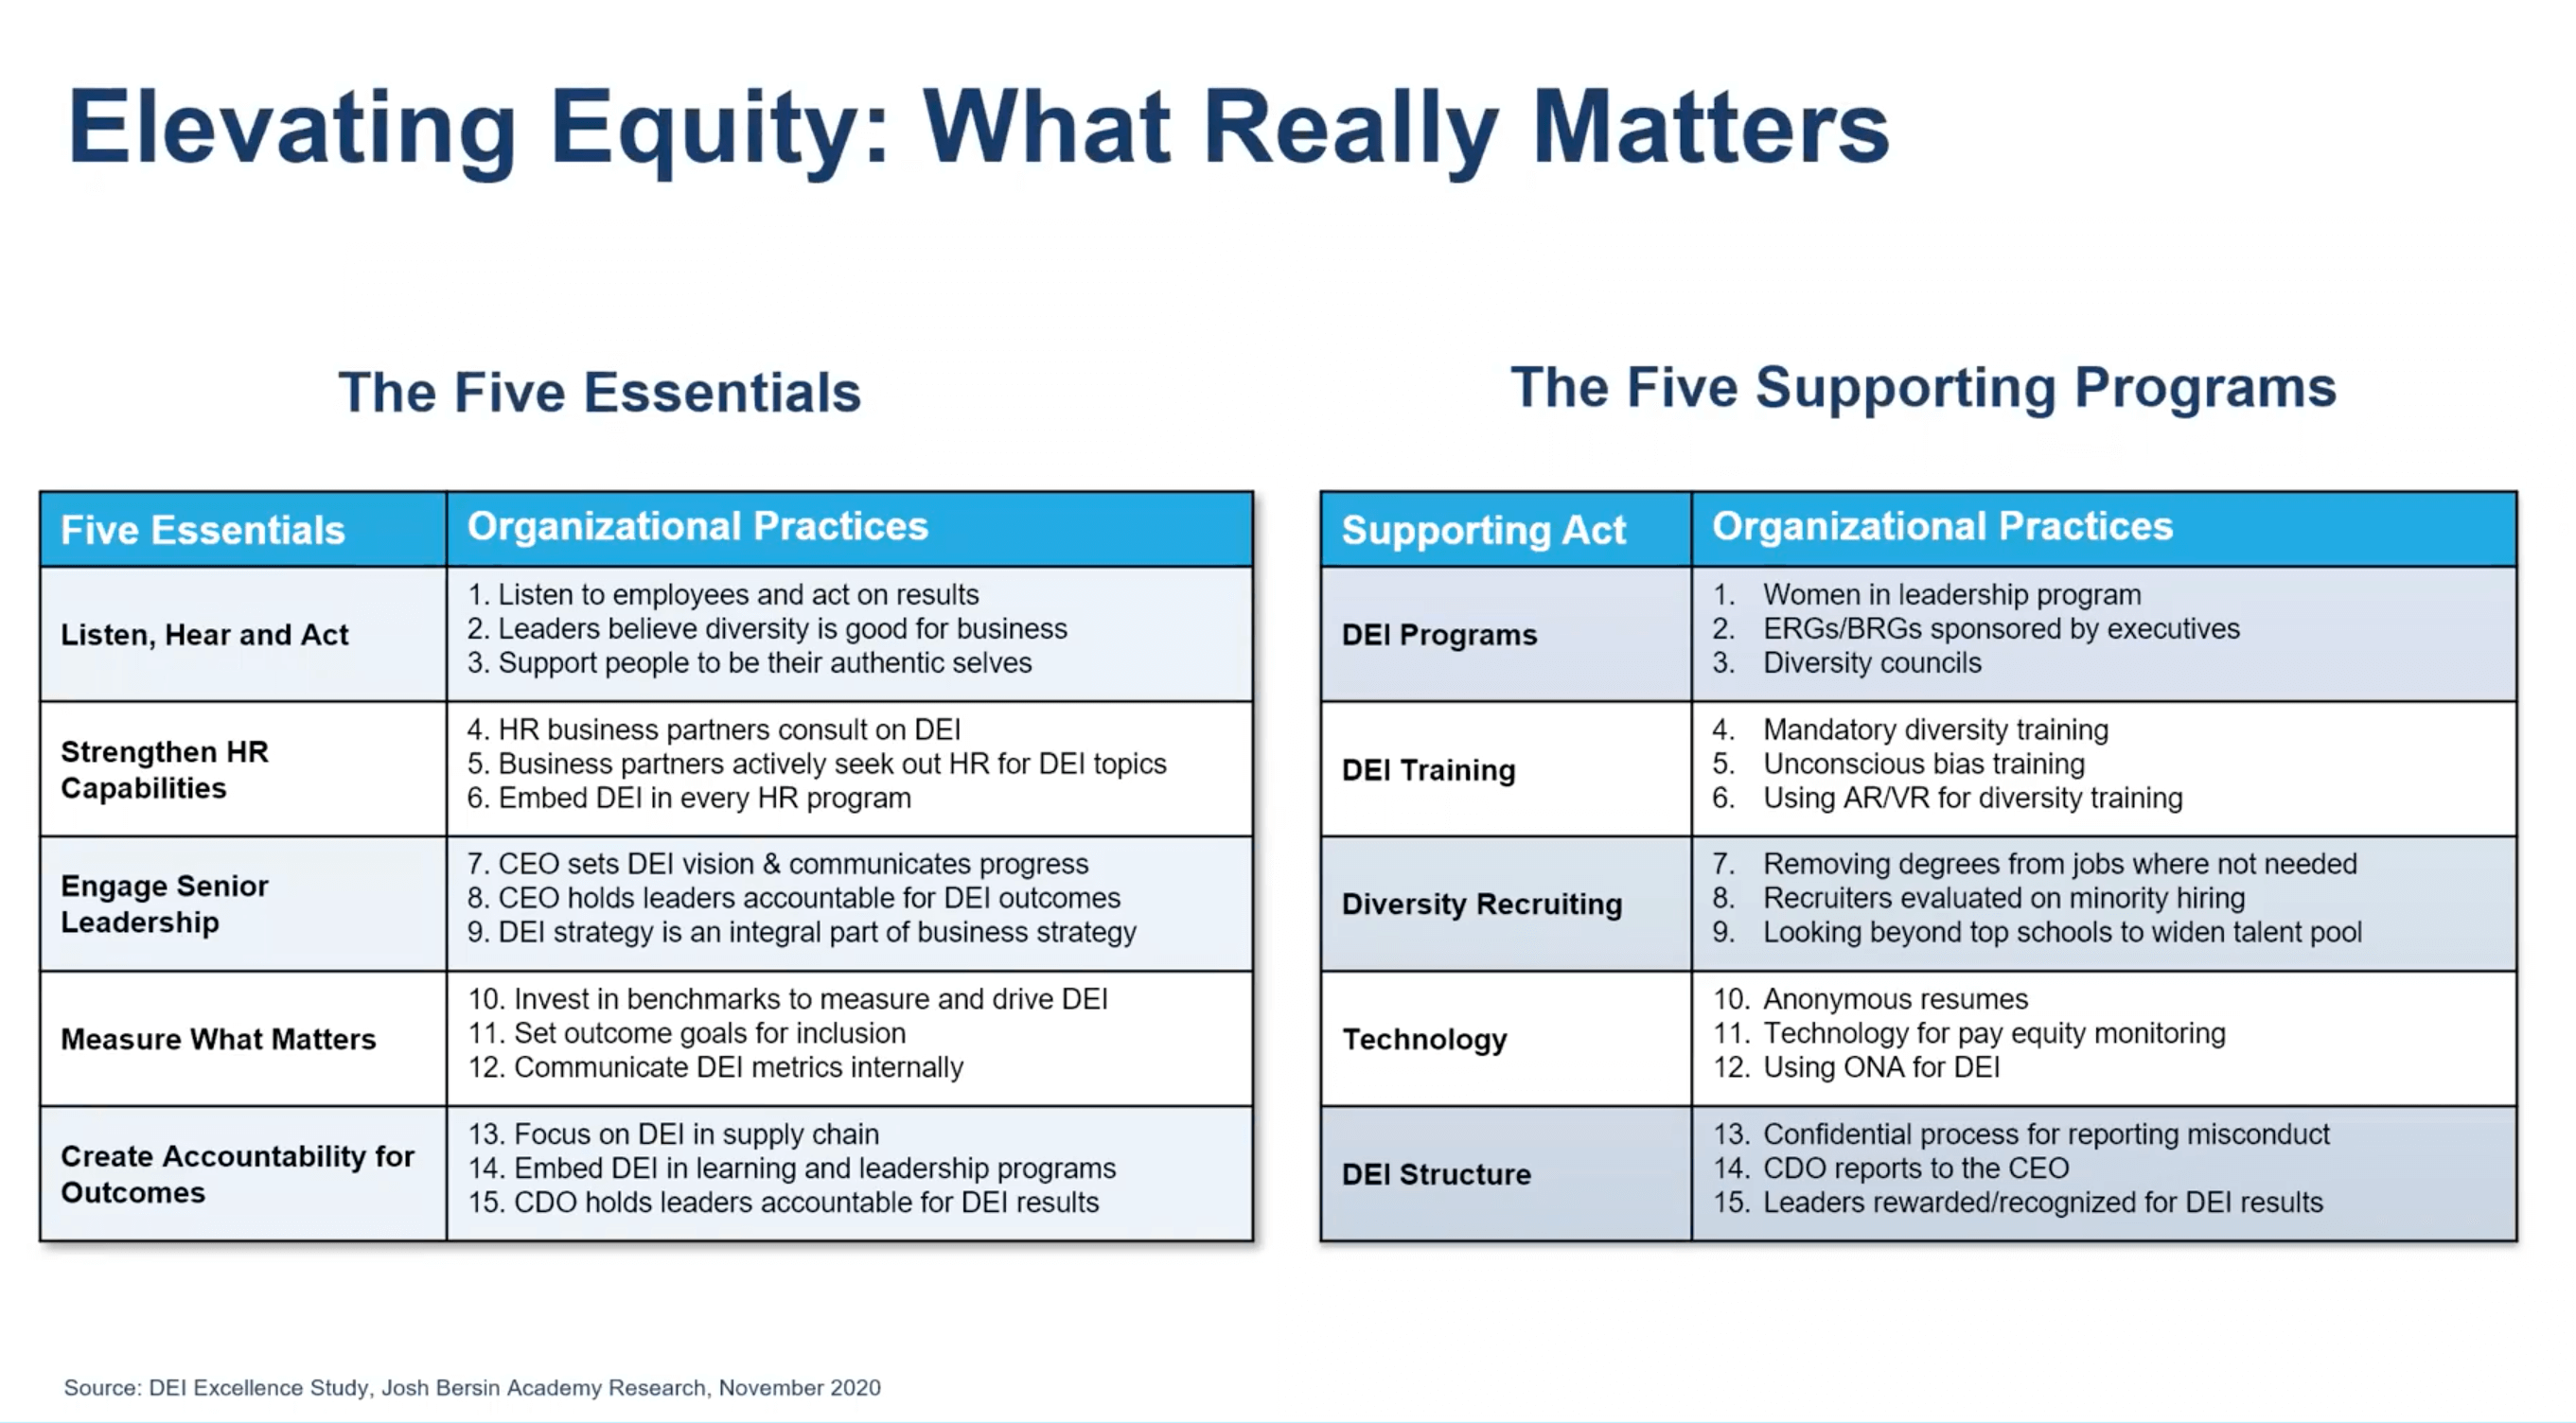 Josh Bersin - Elevating Equity: What really matters